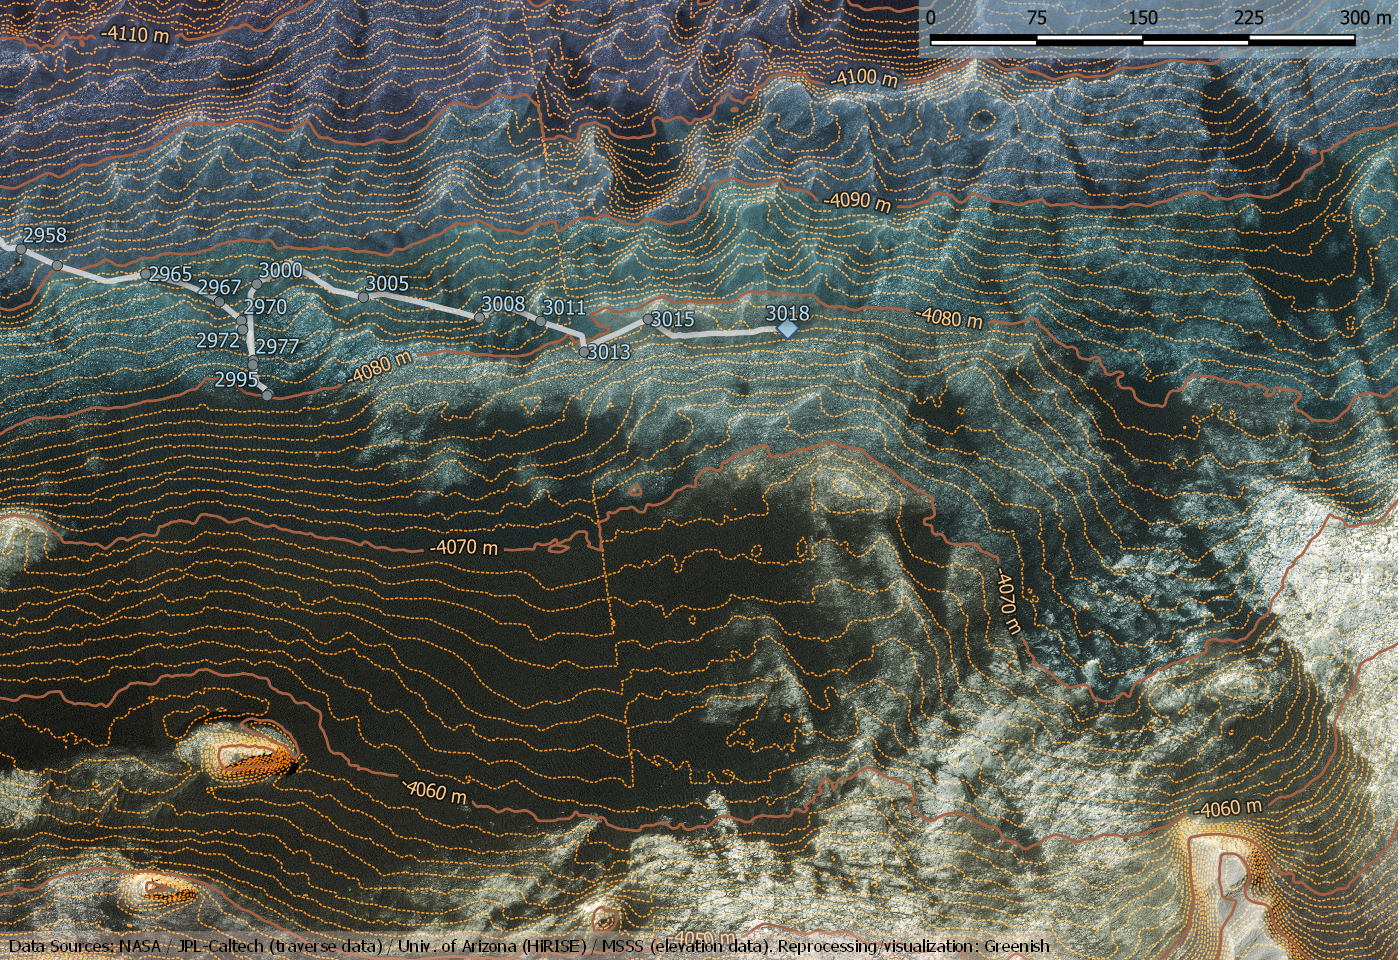 60194f0bd8414_3018Contour_Map0102Verdatre.png.cb1119e8c333d3e278ee3e5dcd38156c.png